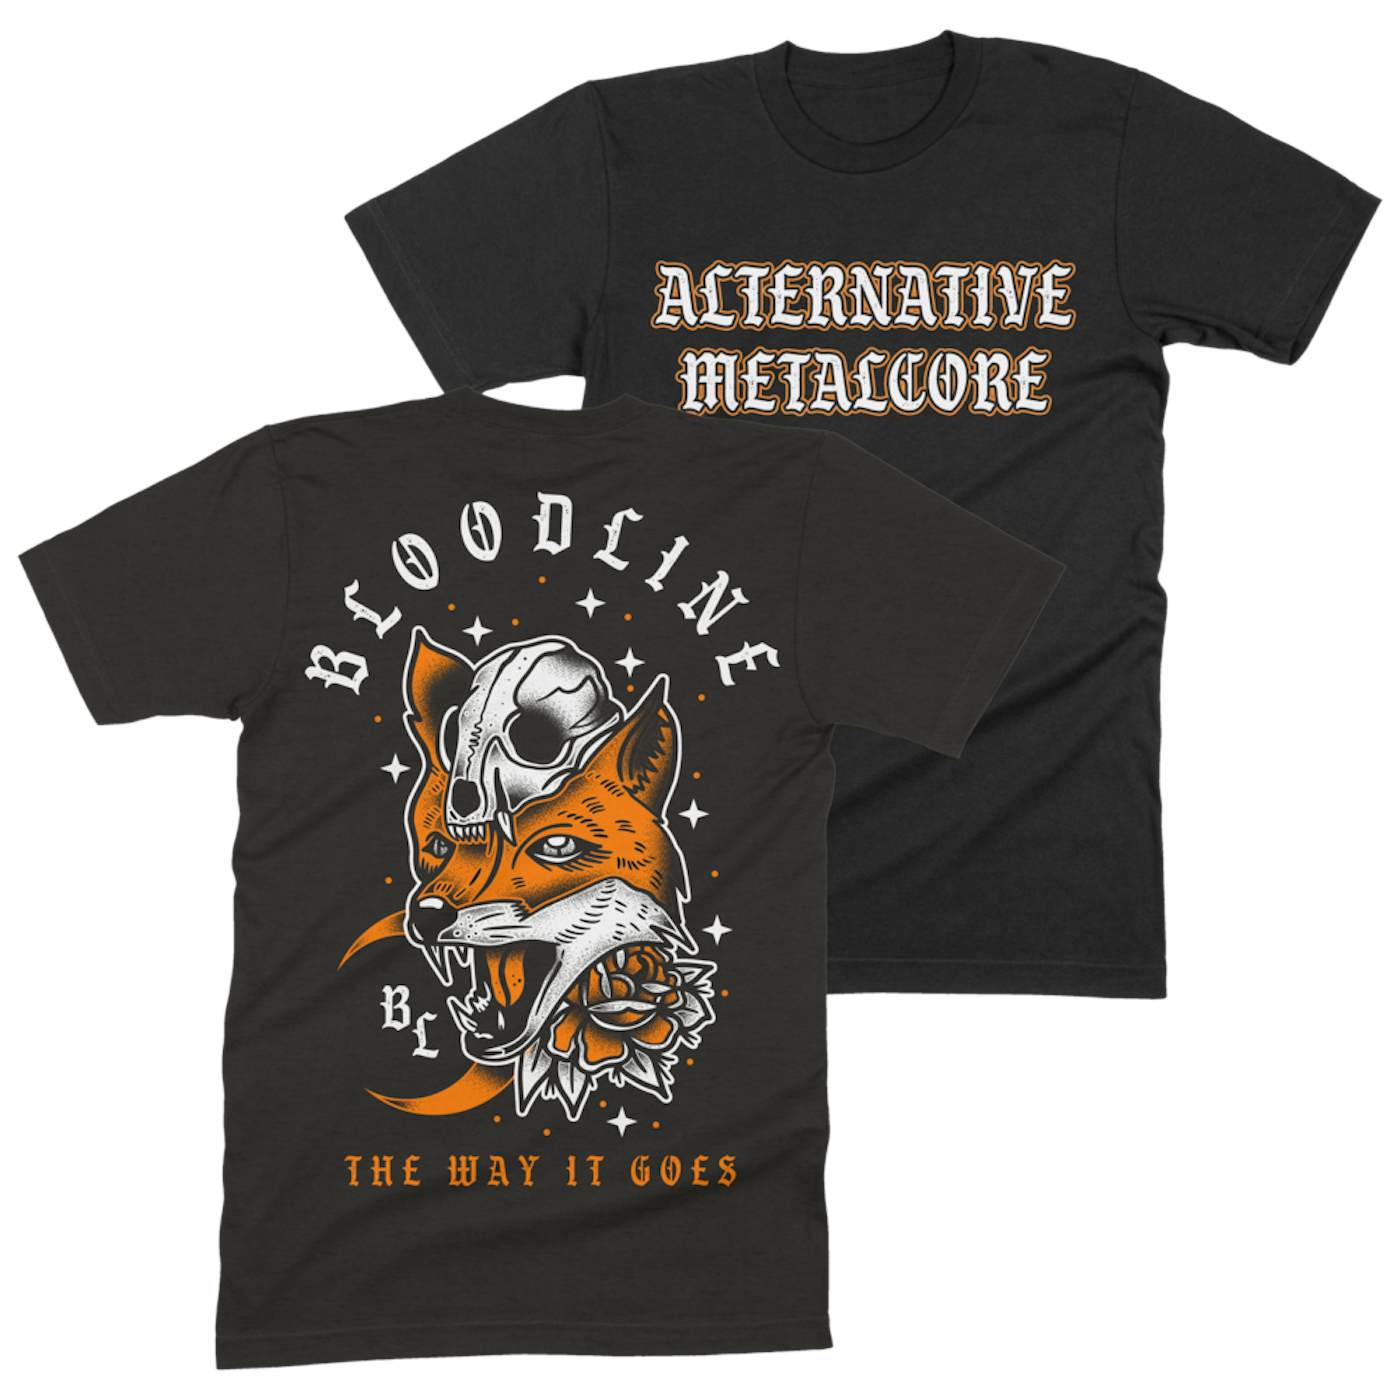 Bloodline - The Way It Goes Shirt